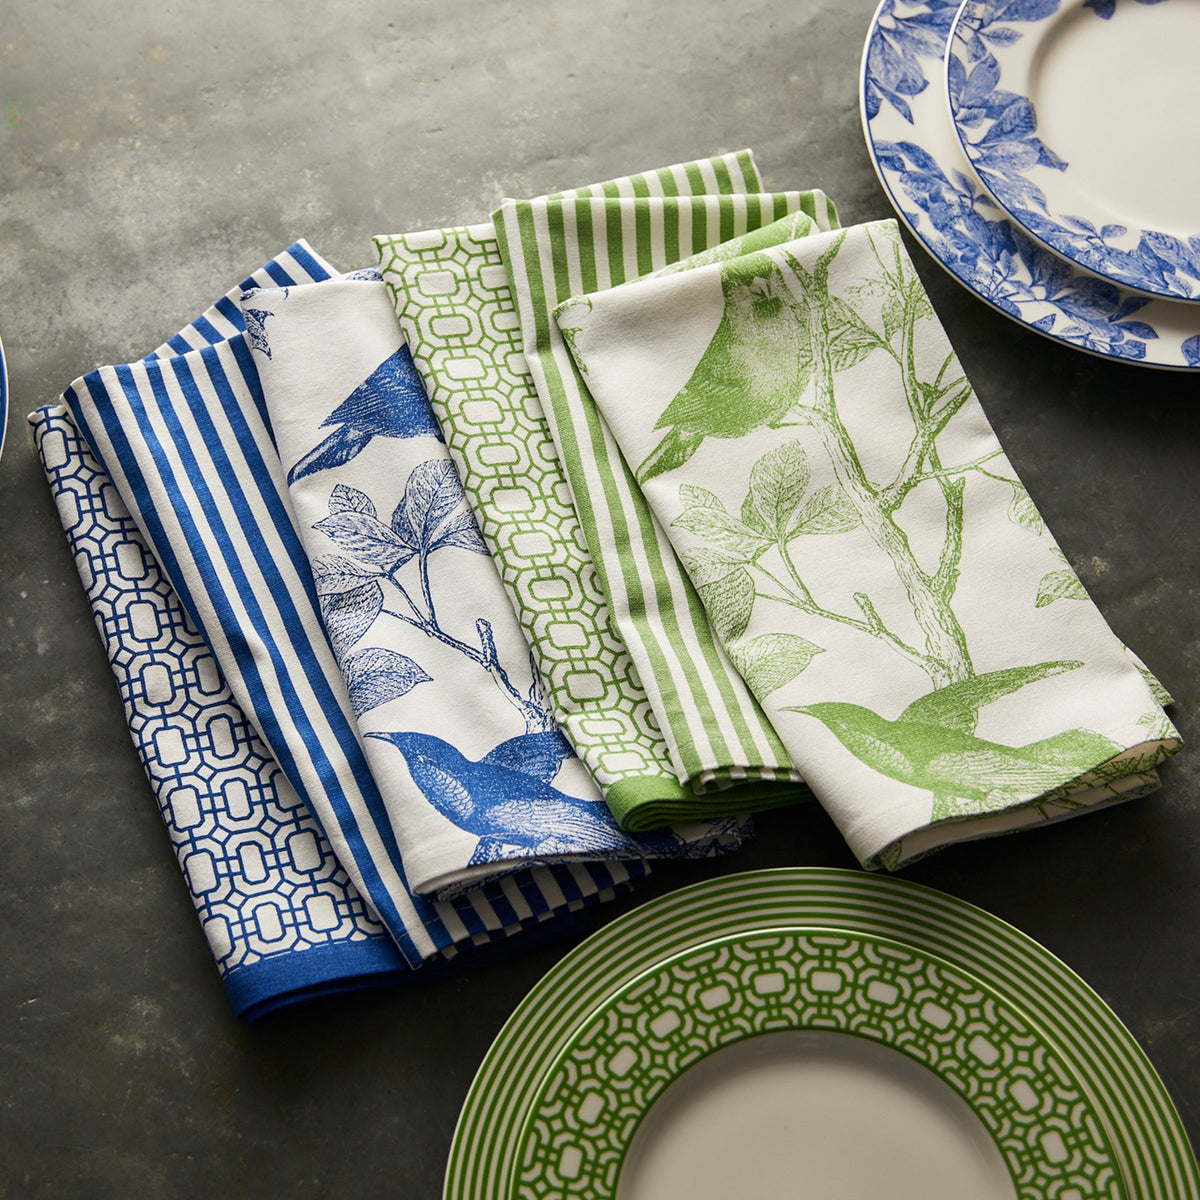 New Oversized Dinner Napkins from Caskata in 100% cotton, shades of green and blue.